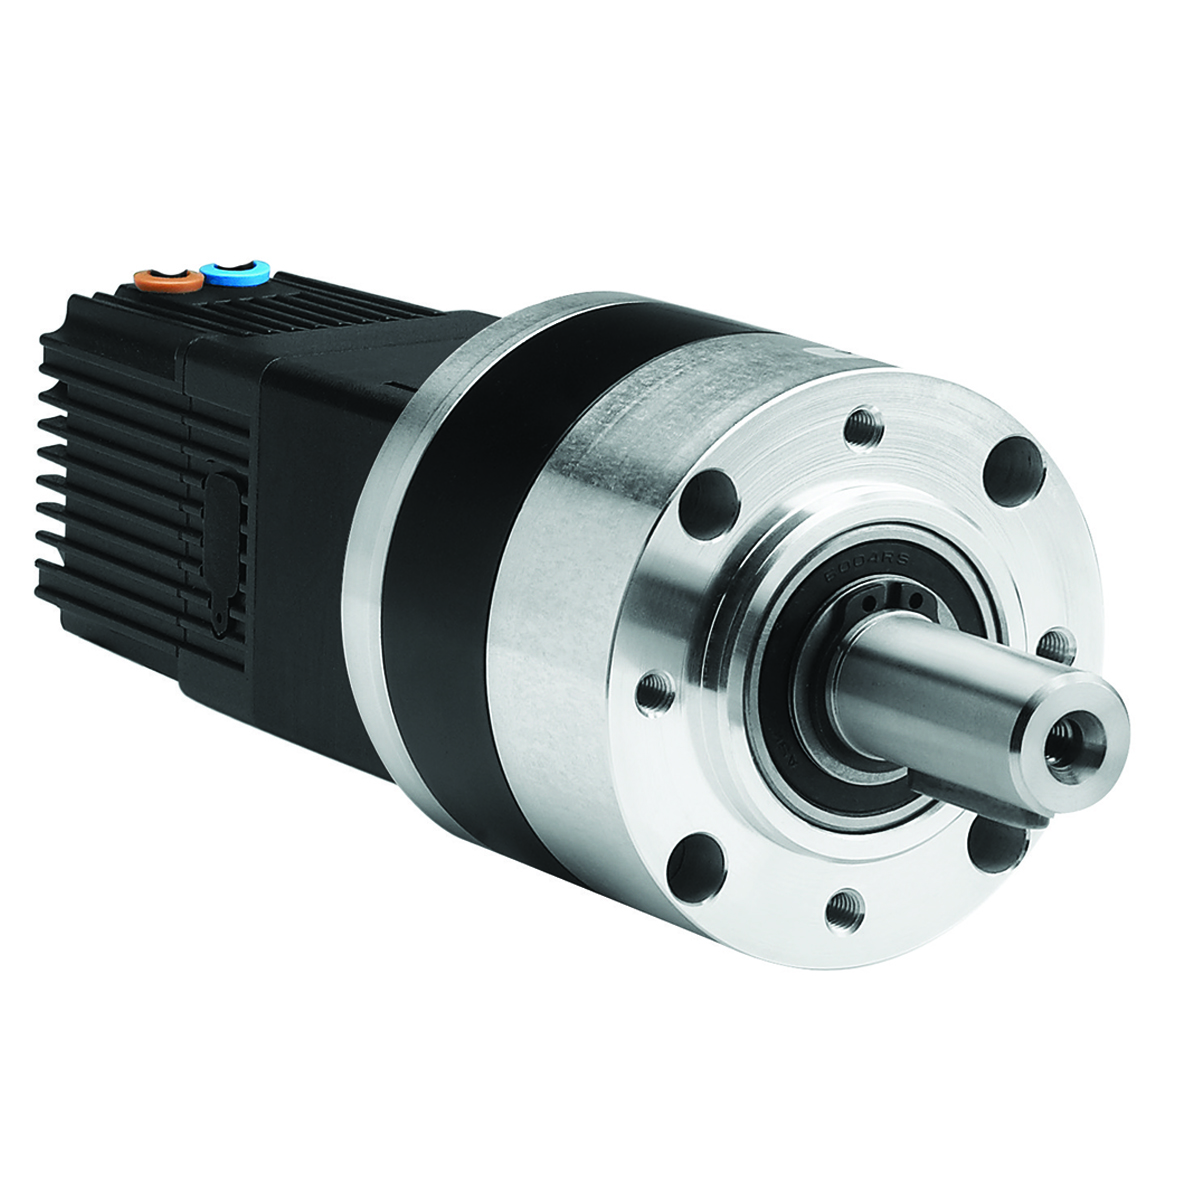 SQ57 Motor 150W 12-32Vdc + Drive TNi21 PWM + Gearbox P81 - 2 stages ratio 19.20